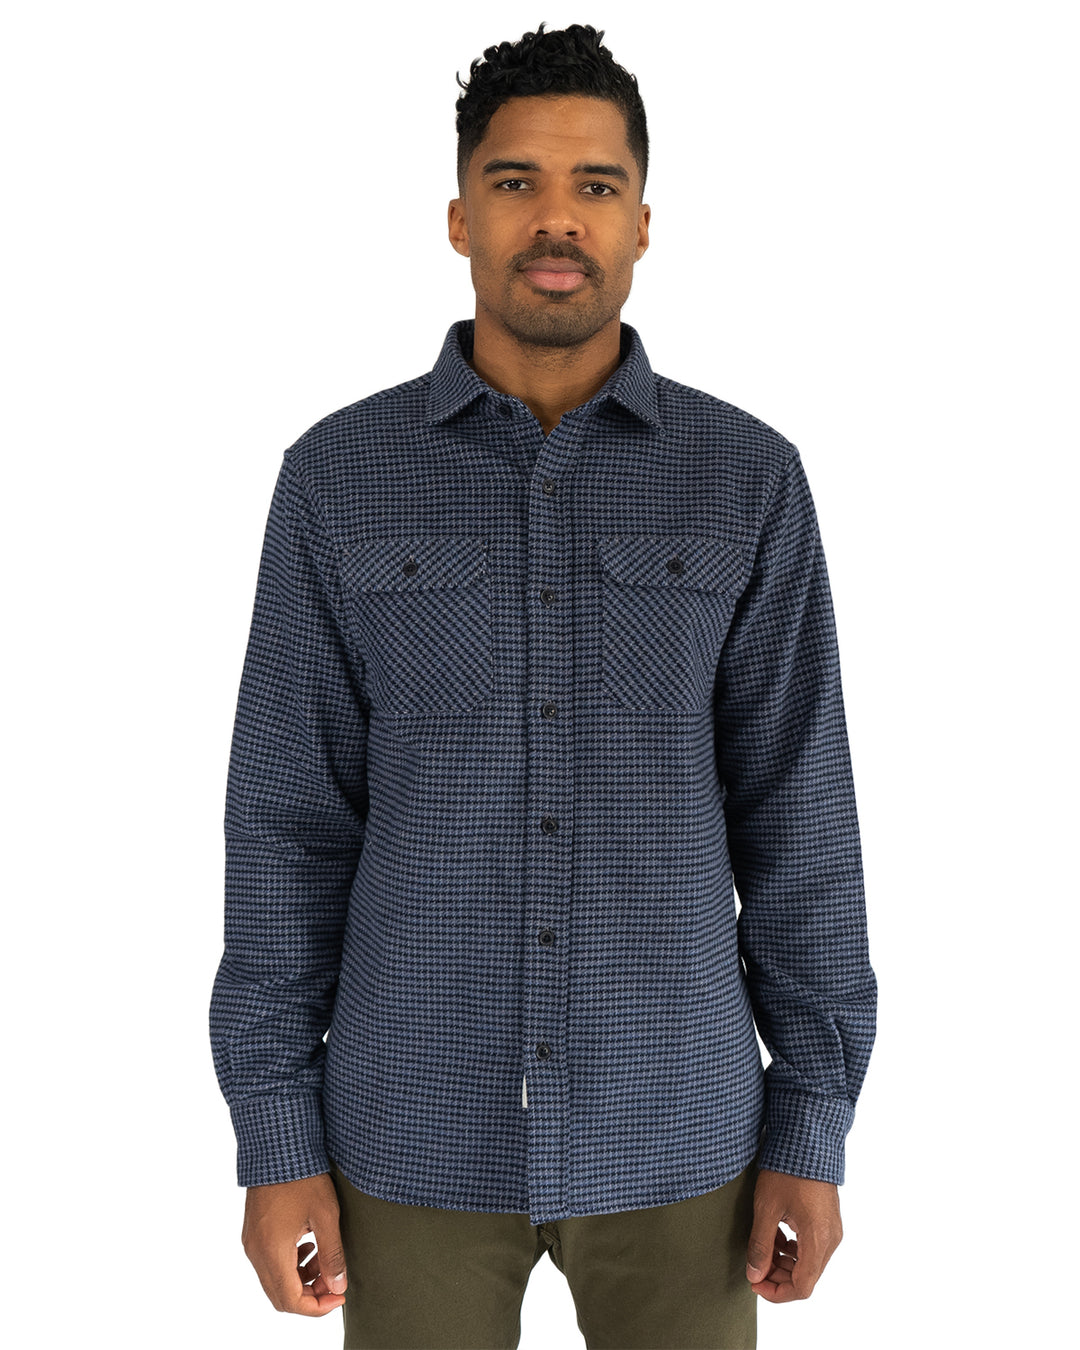 The Grand Flannel in Dark Blue by MuskOx Flannels, 100% Heavyweight Cotton Flannel Shirt for Men